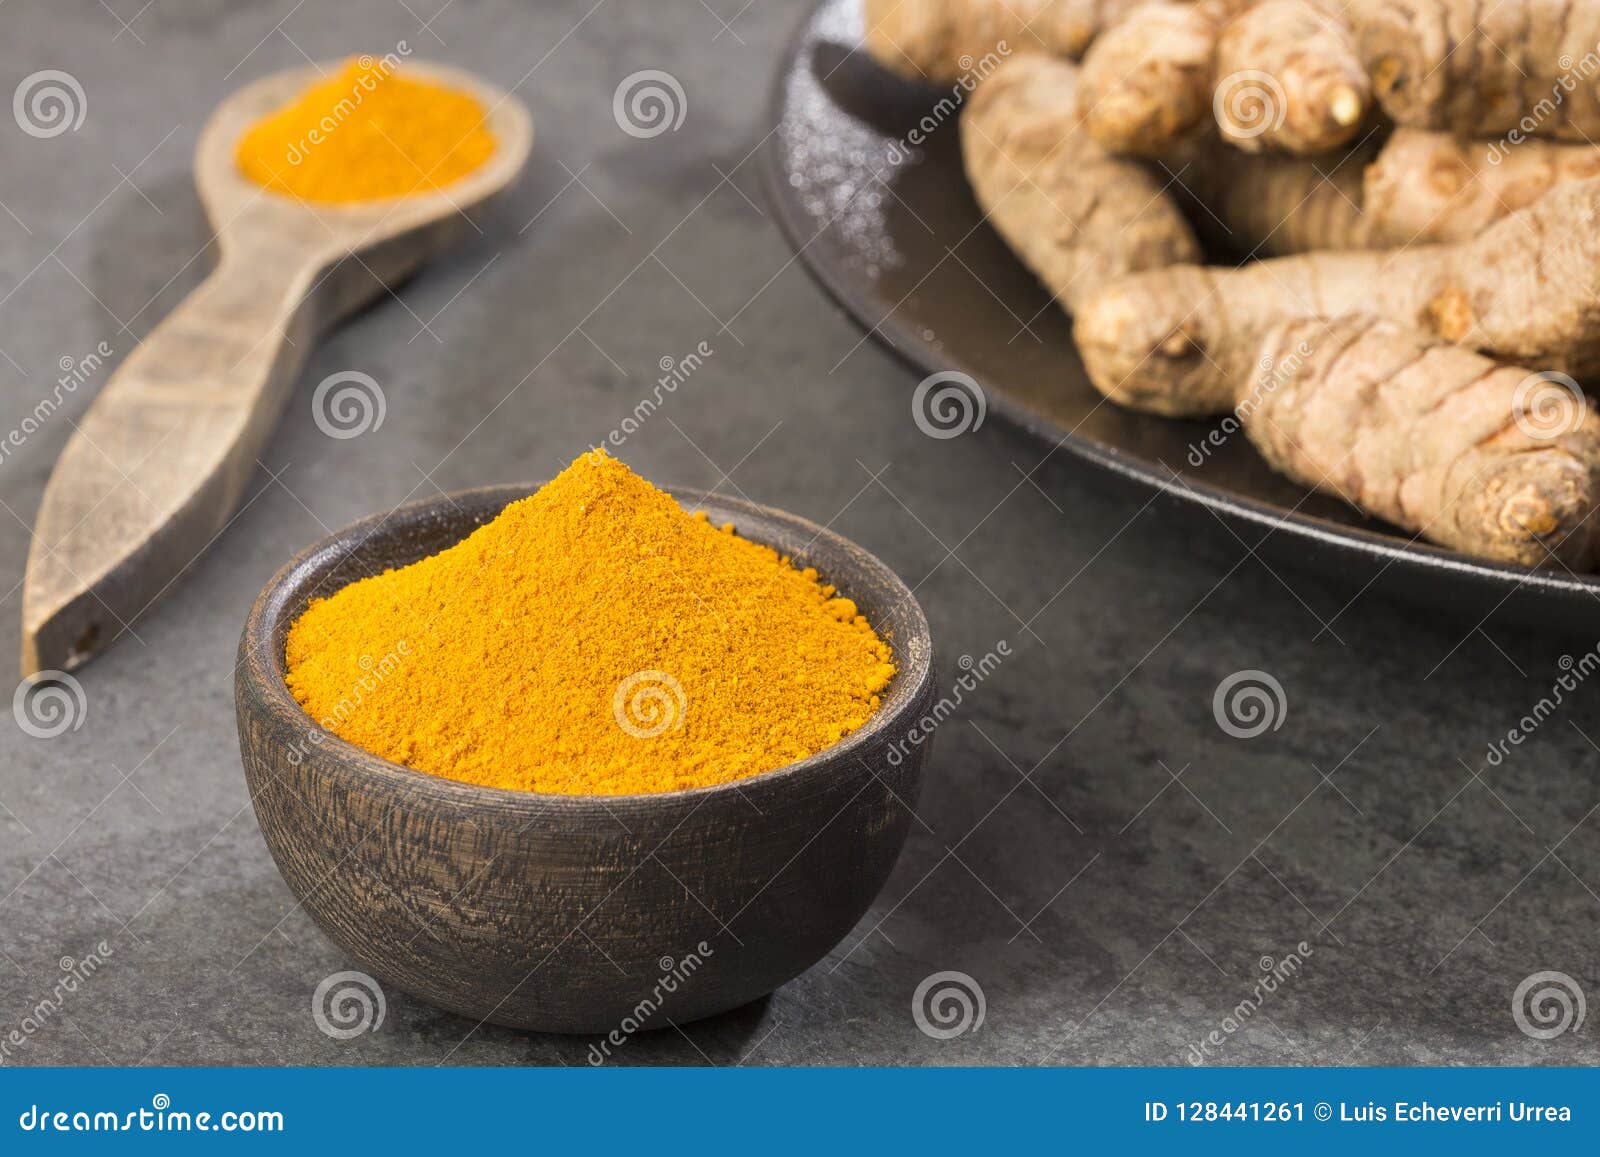 turmeric powder and fresh turmeric on wooden background